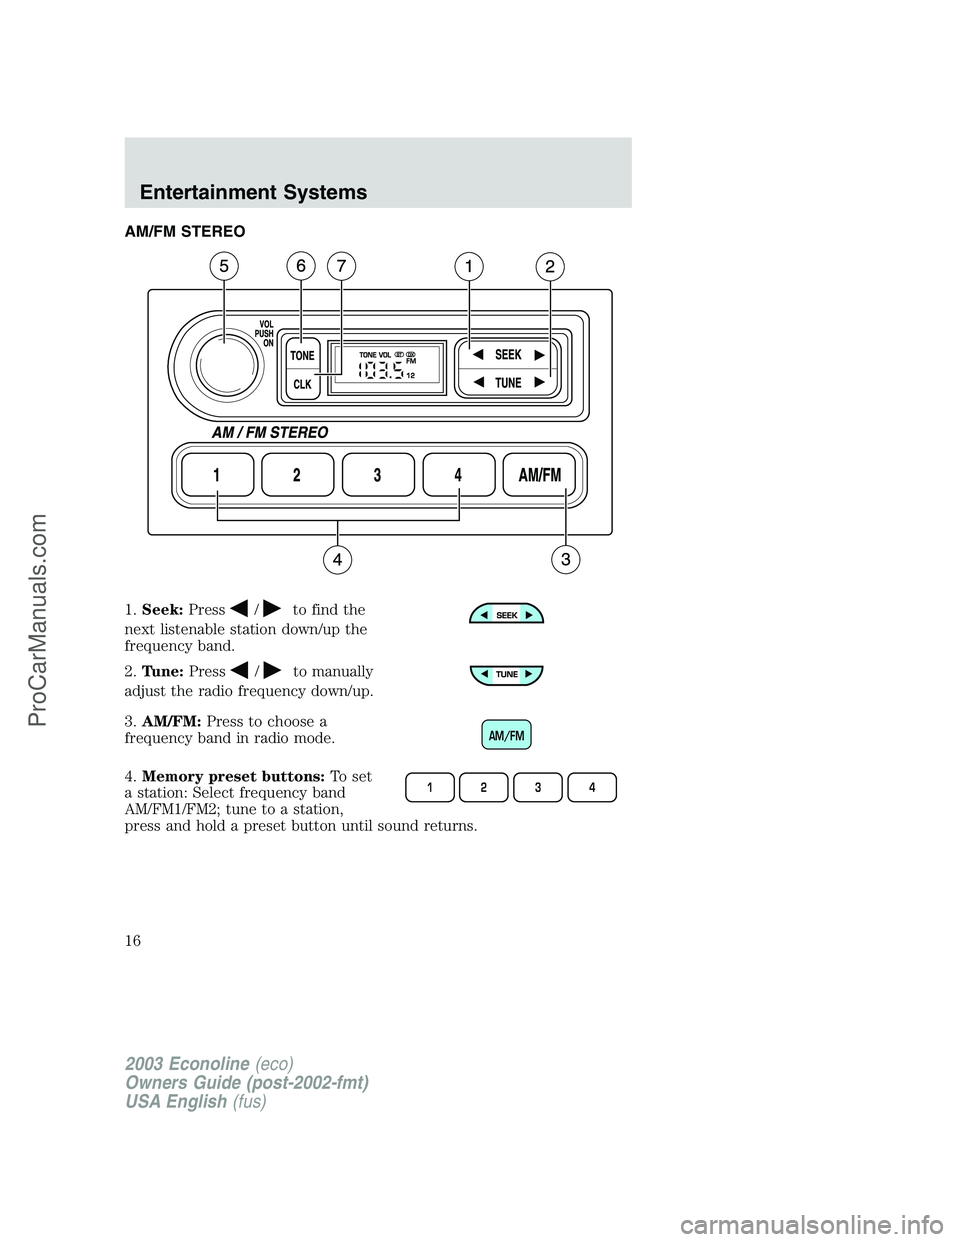 FORD E-350 2003 User Guide AM/FM STEREO
1.Seek:Press
/to find the
next listenable station down/up the
frequency band.
2.Tune:Press
/to manually
adjust the radio frequency down/up.
3.AM/FM:Press to choose a
frequency band in rad